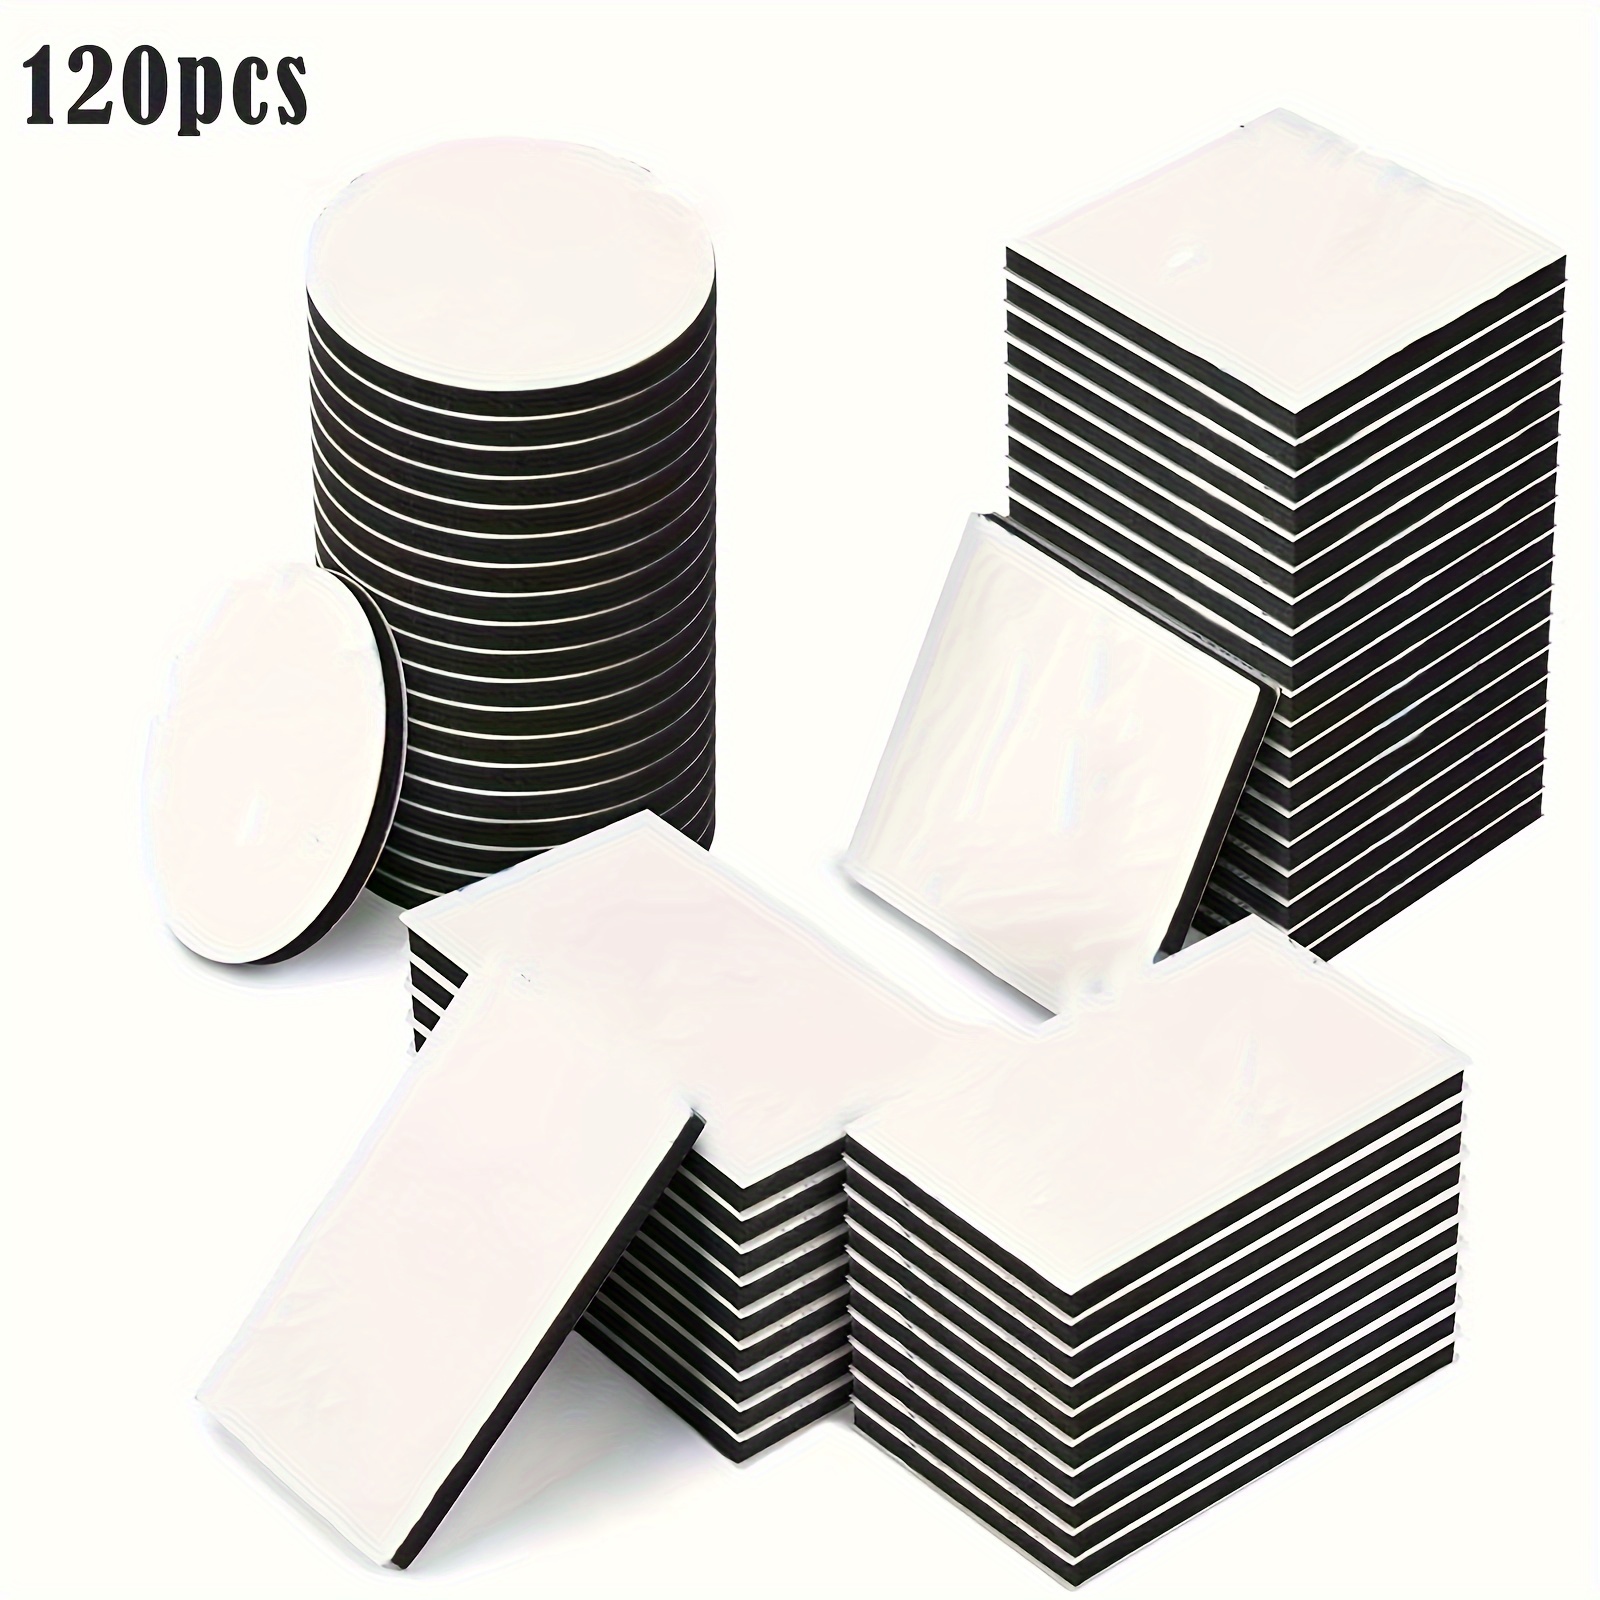 1-3mm Thickness Super Strong Double Faced Adhesive Tape Foam